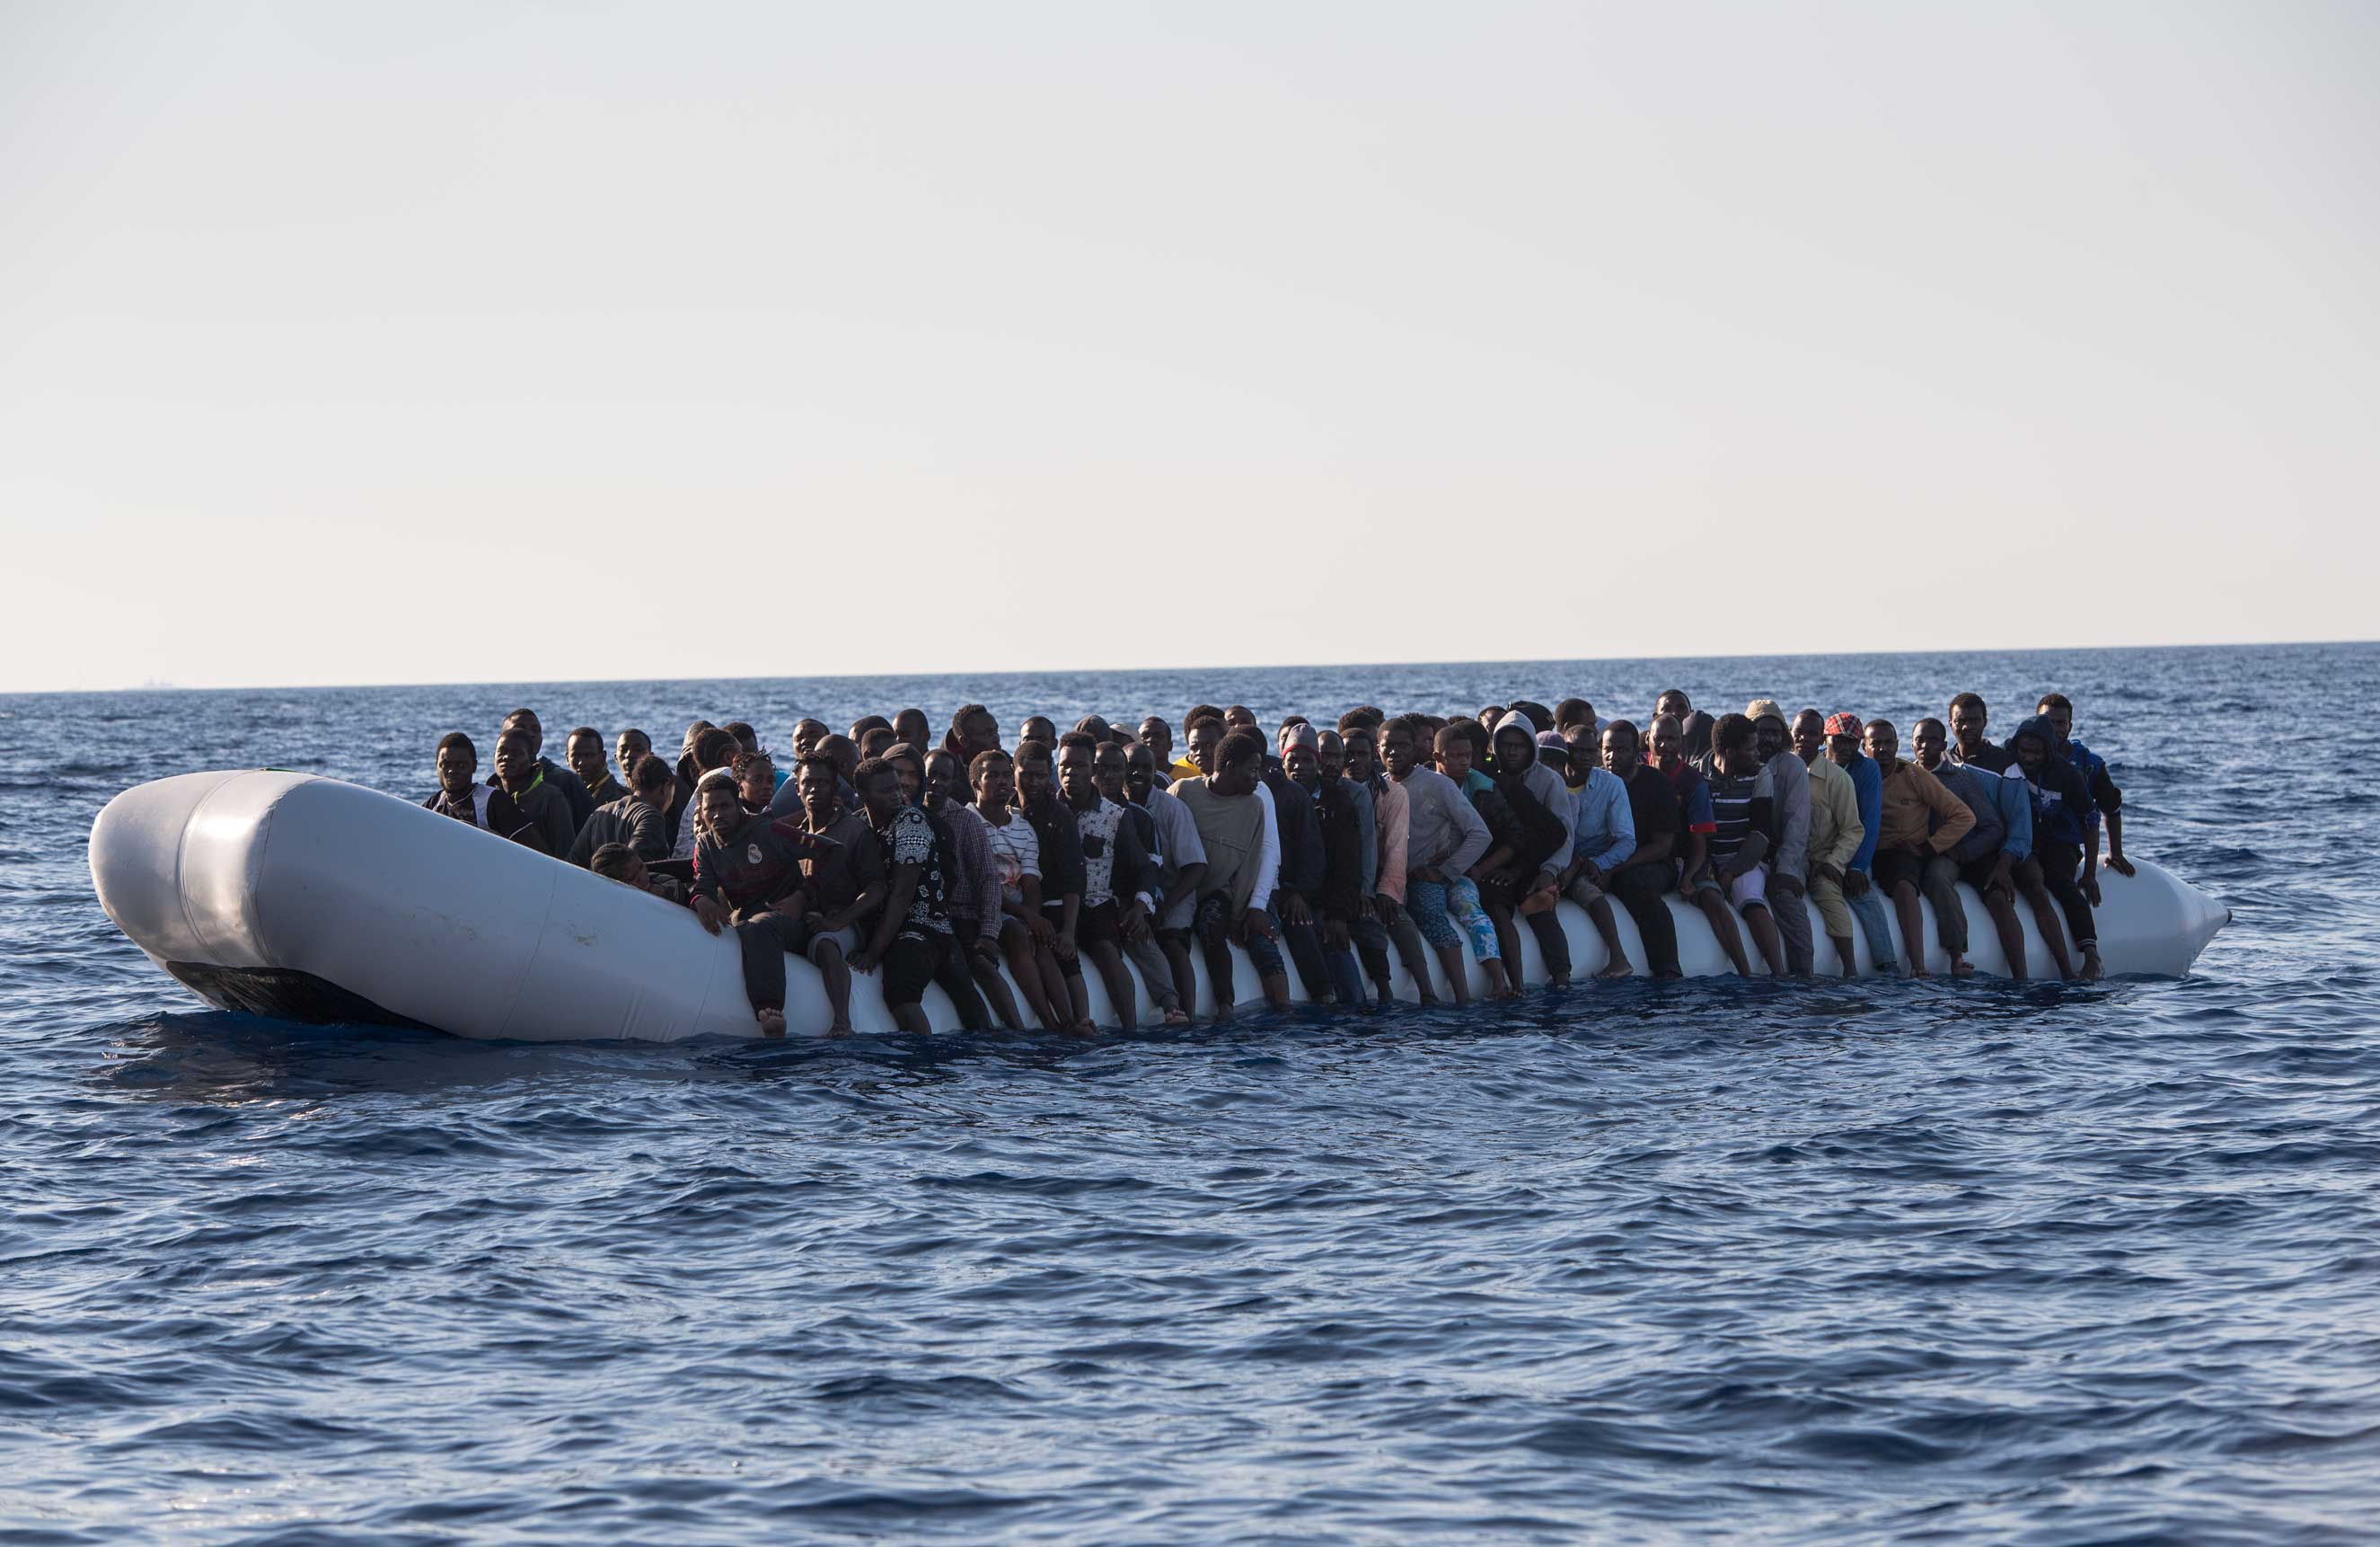 This group of more than 130 migrants made it only a fraction of the way to Europe before being rescued at sea. (Lynsey Addario—Getty Images Reportage for TIME)